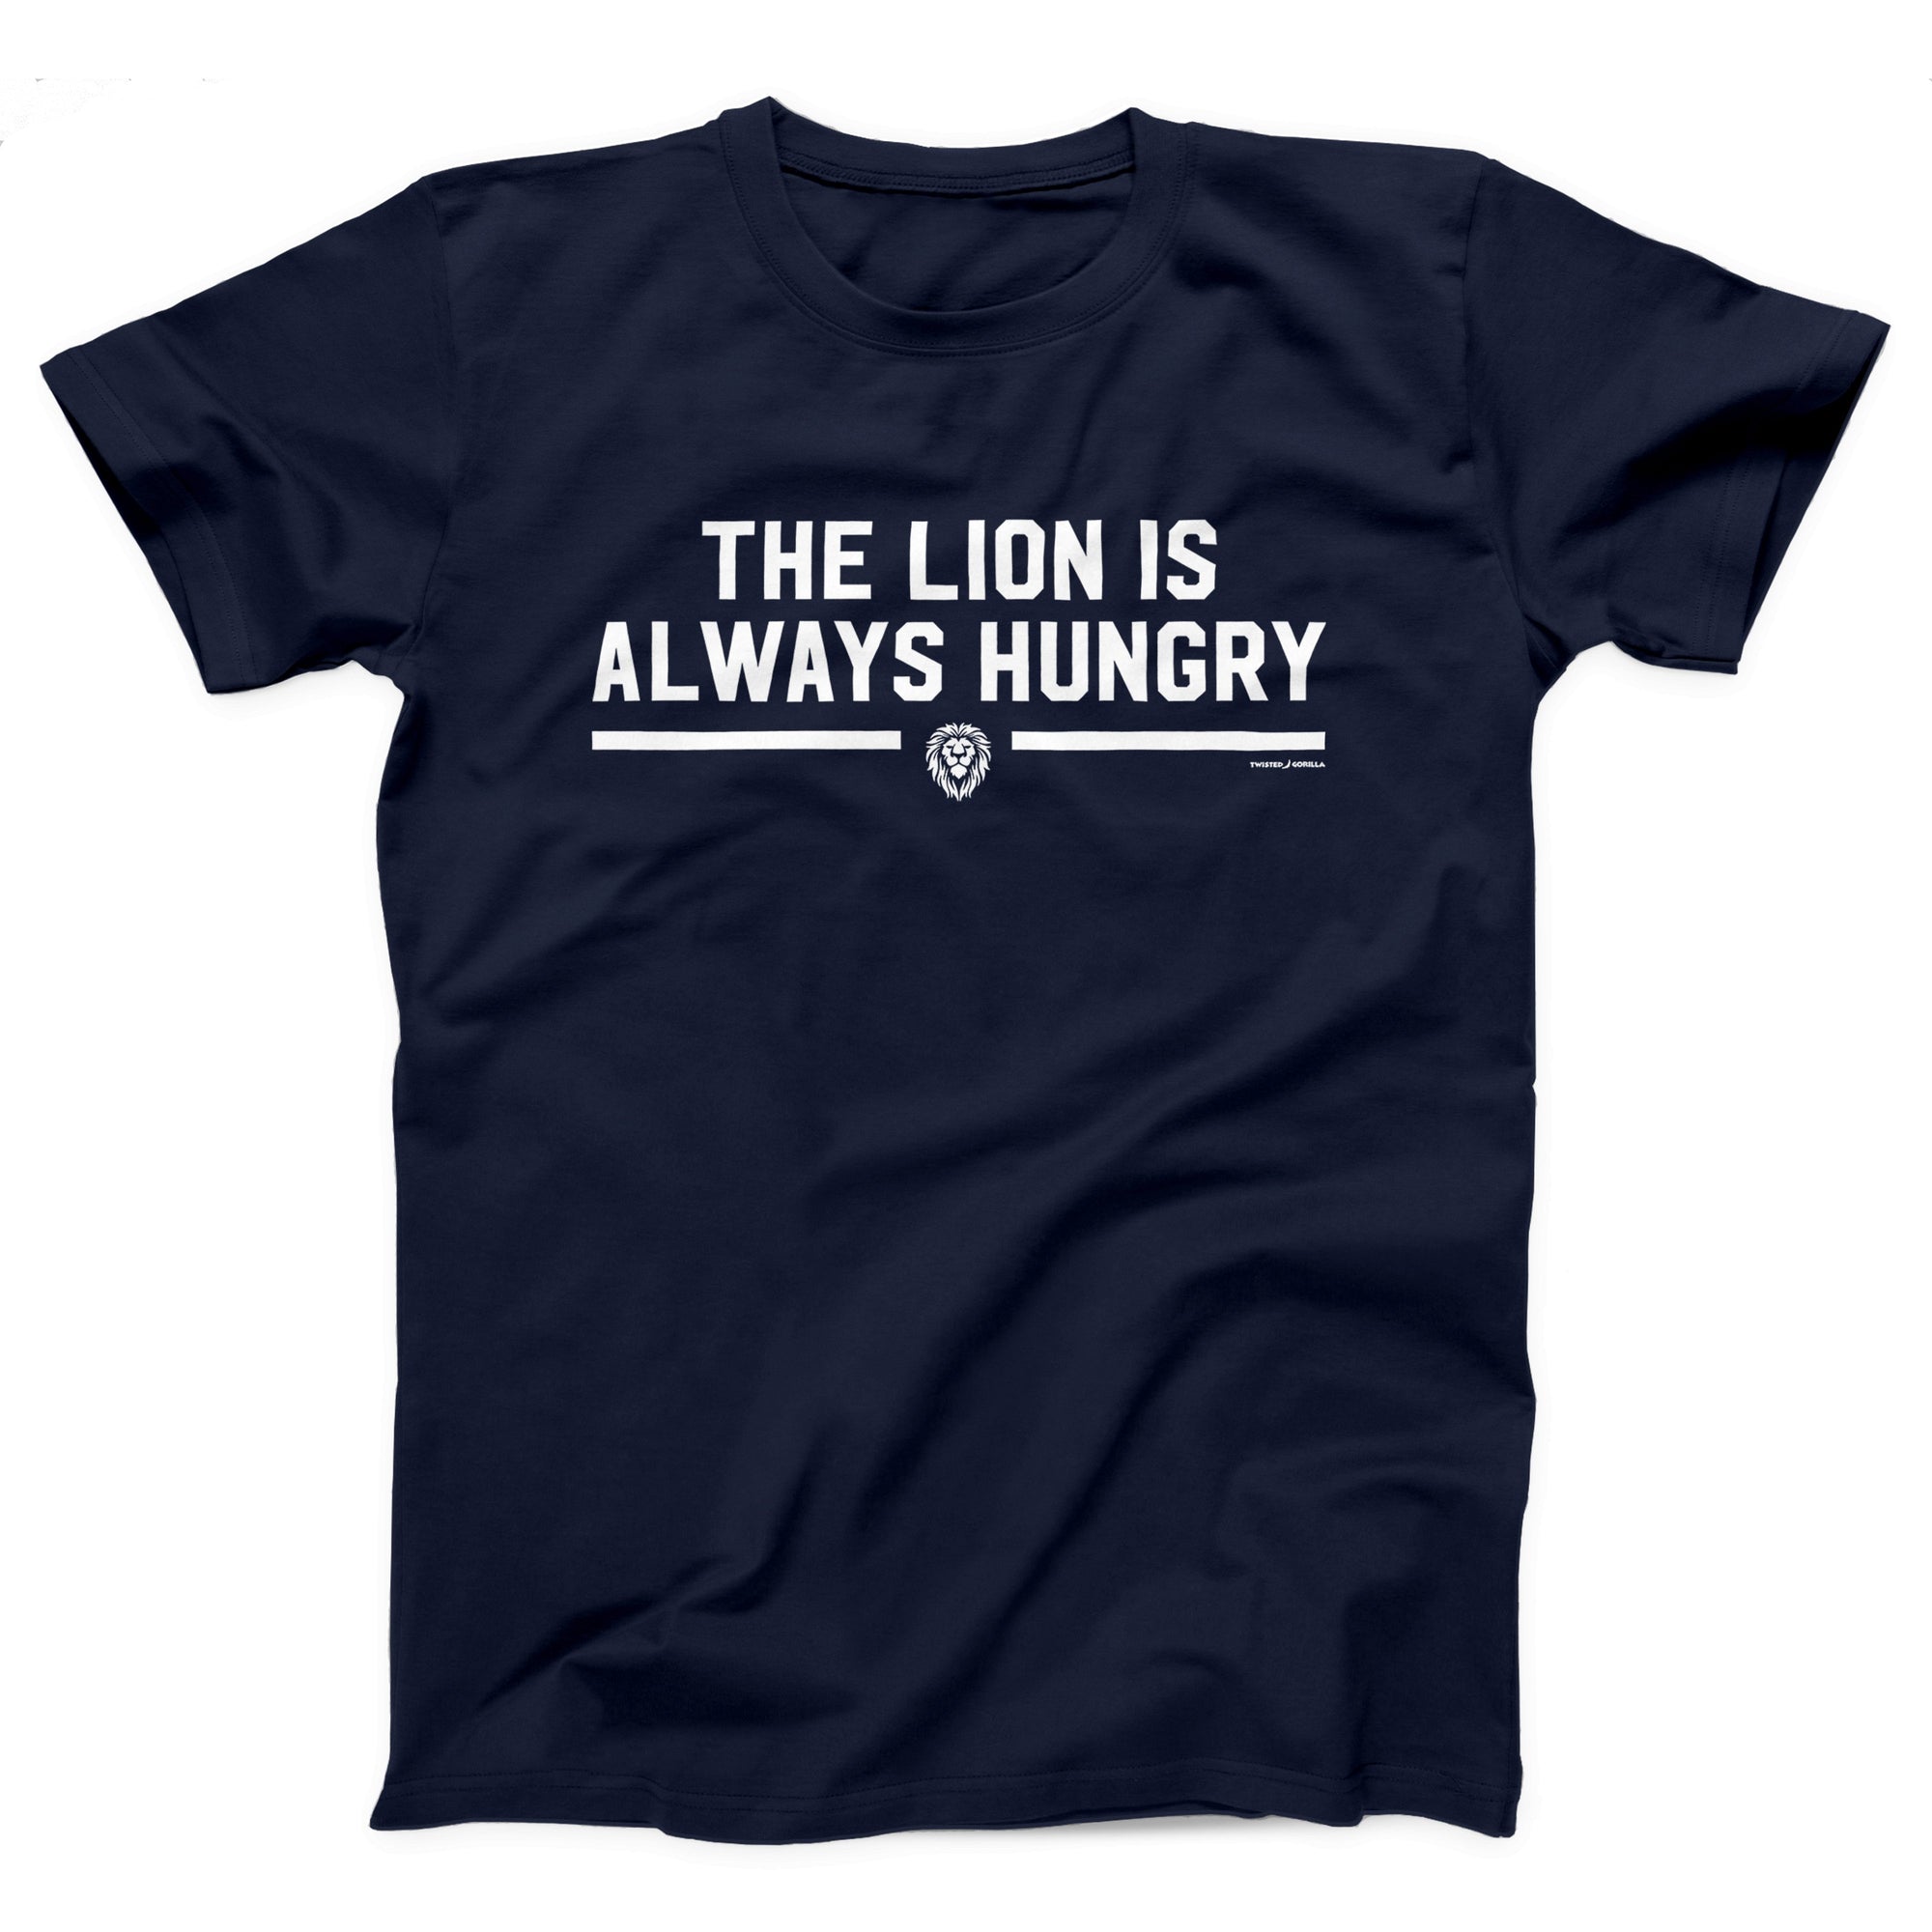 The Lion Is Always Hungry Adult Unisex T-Shirt - anishphilip